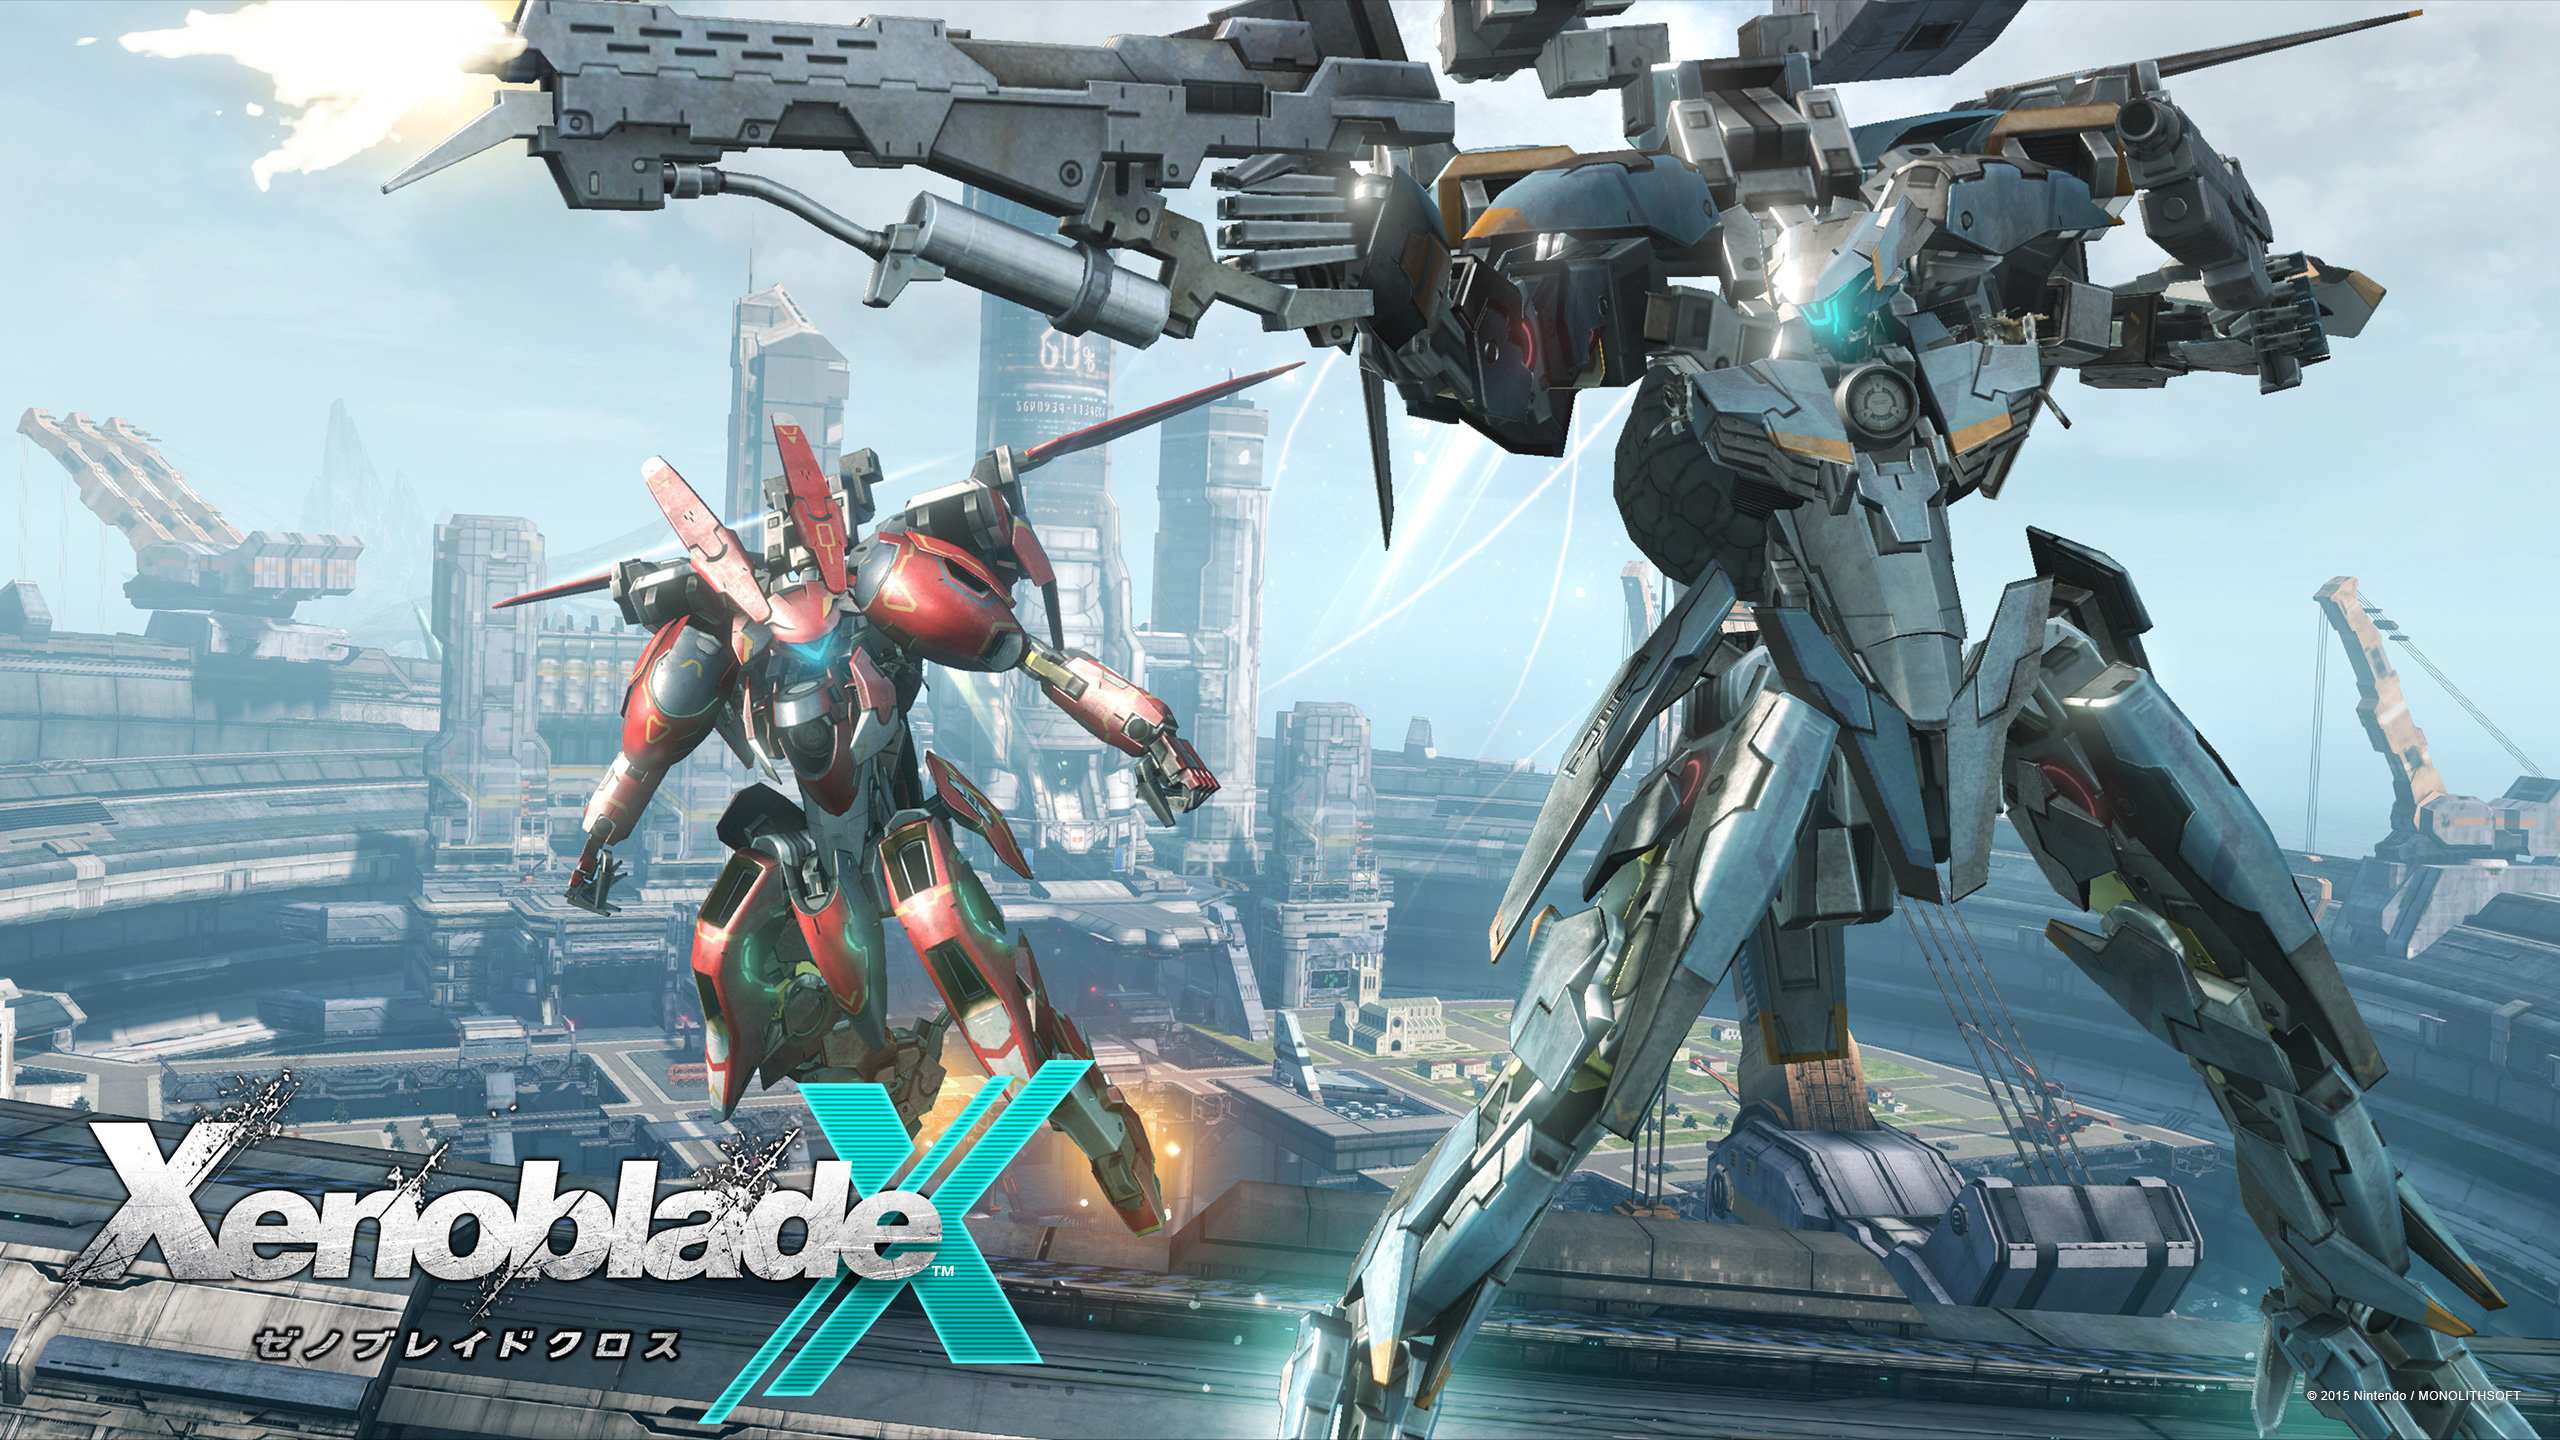 Download hd 2560x1440 Xenoblade Chronicles desktop wallpaper ID:111446 for free